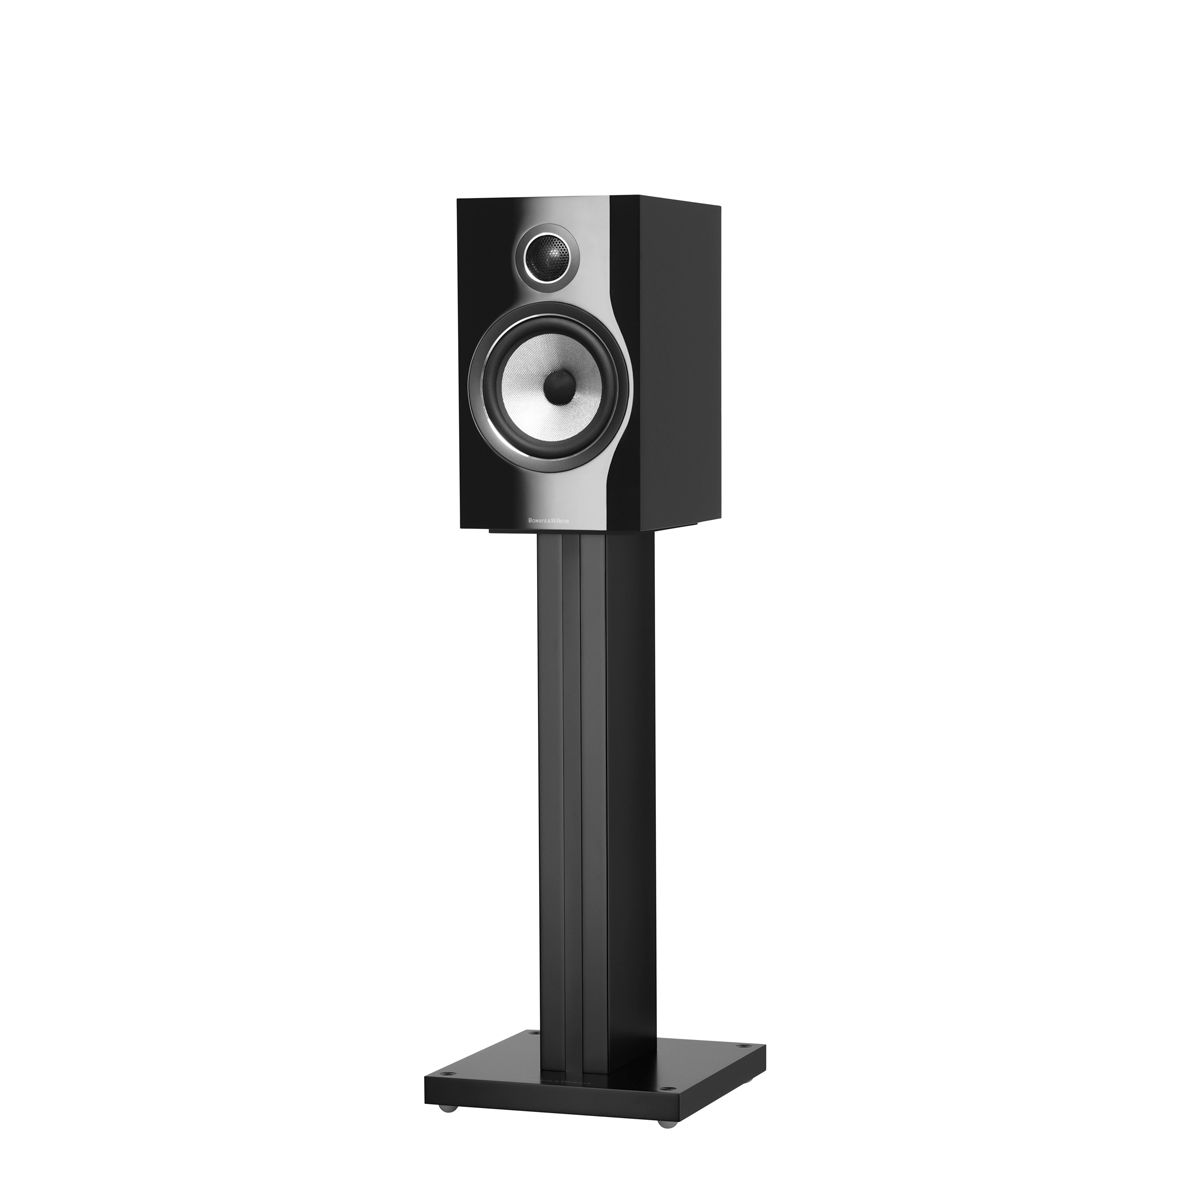 Bowers & Wilkins 706 S2 Standmount Speaker - Gloss Black no grille - Front Angled View